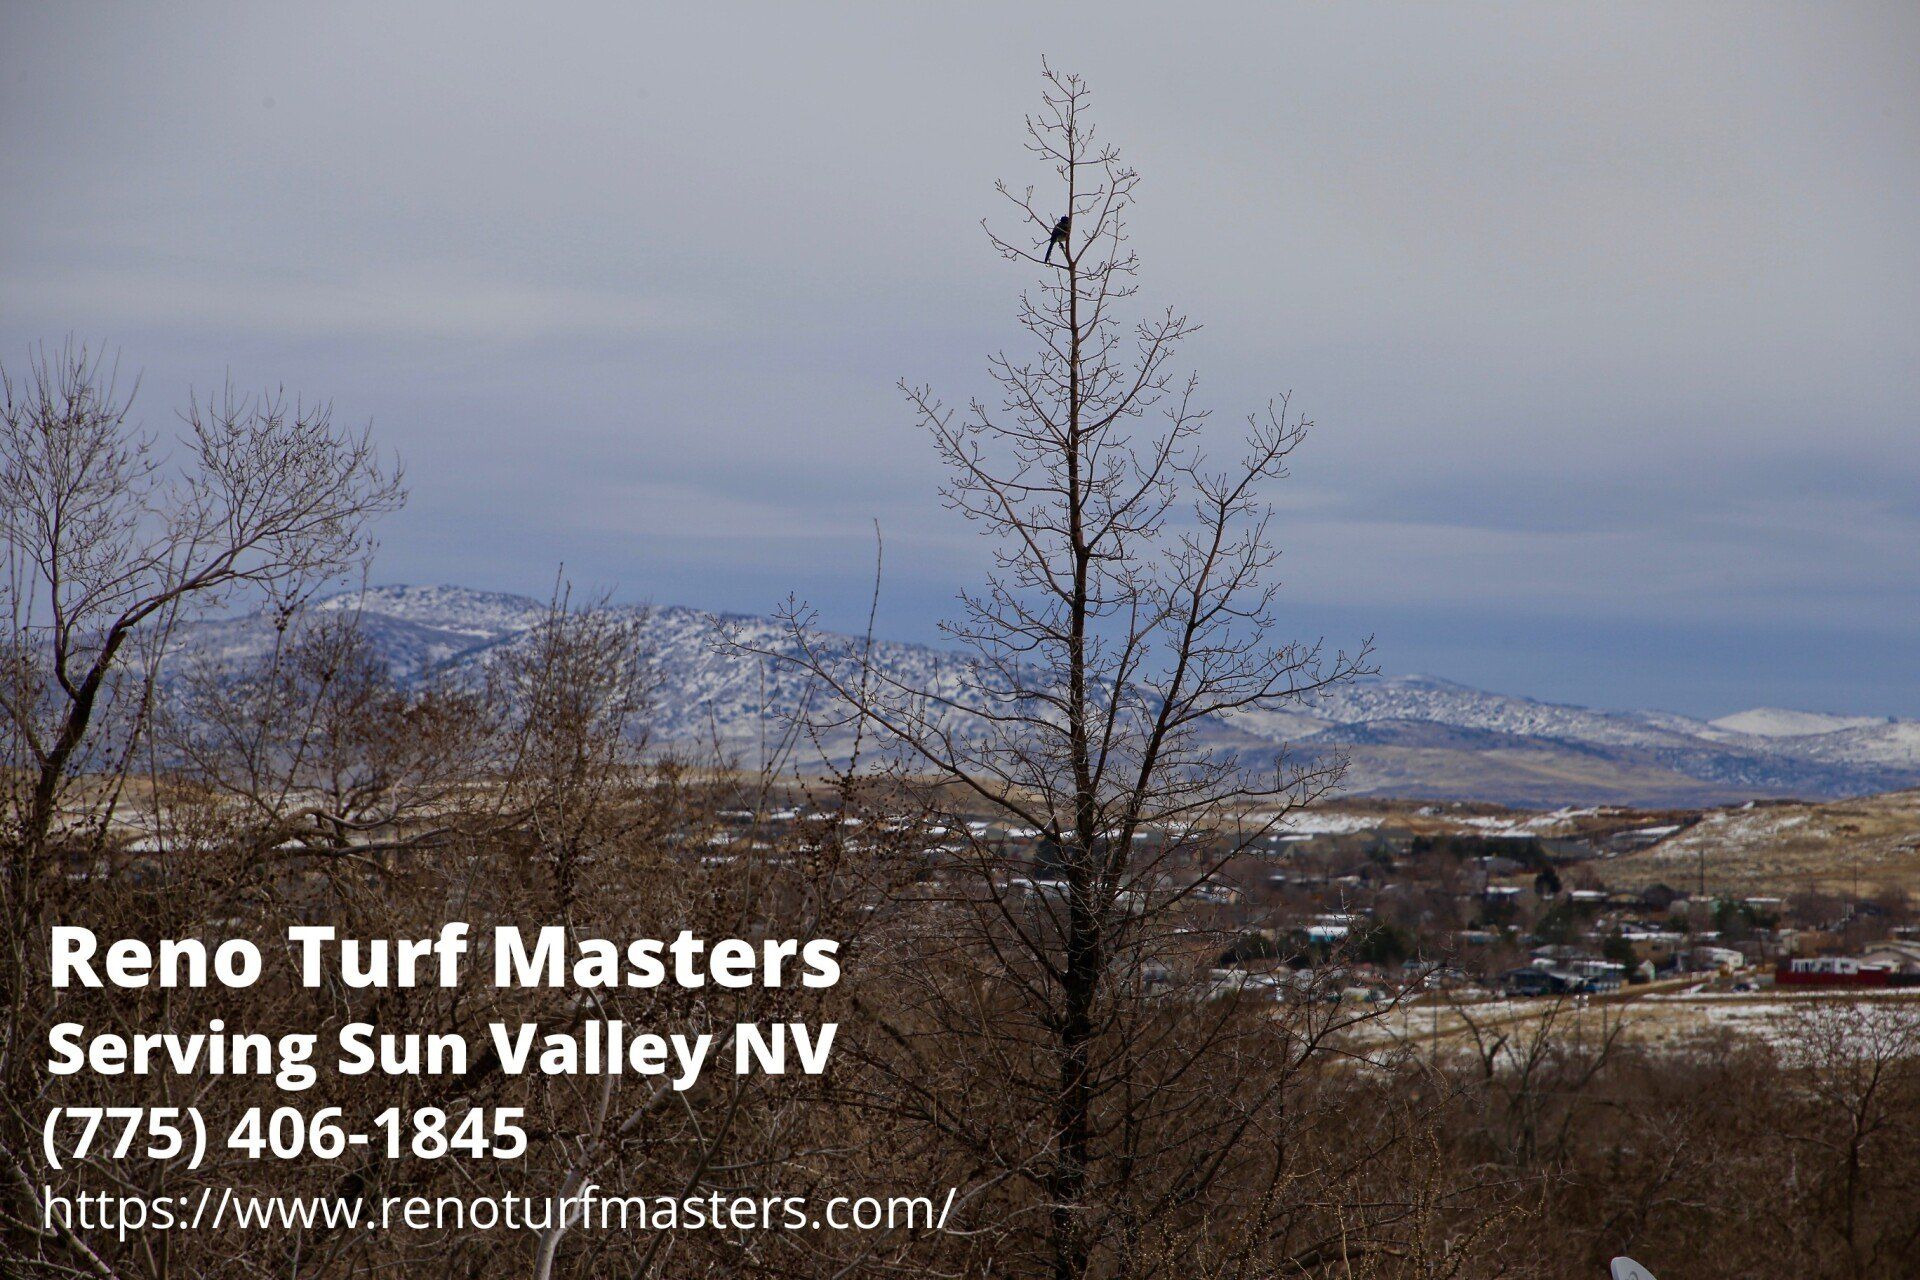 landscape of Sun Valley NV with the contact info of Reno Turf Masters